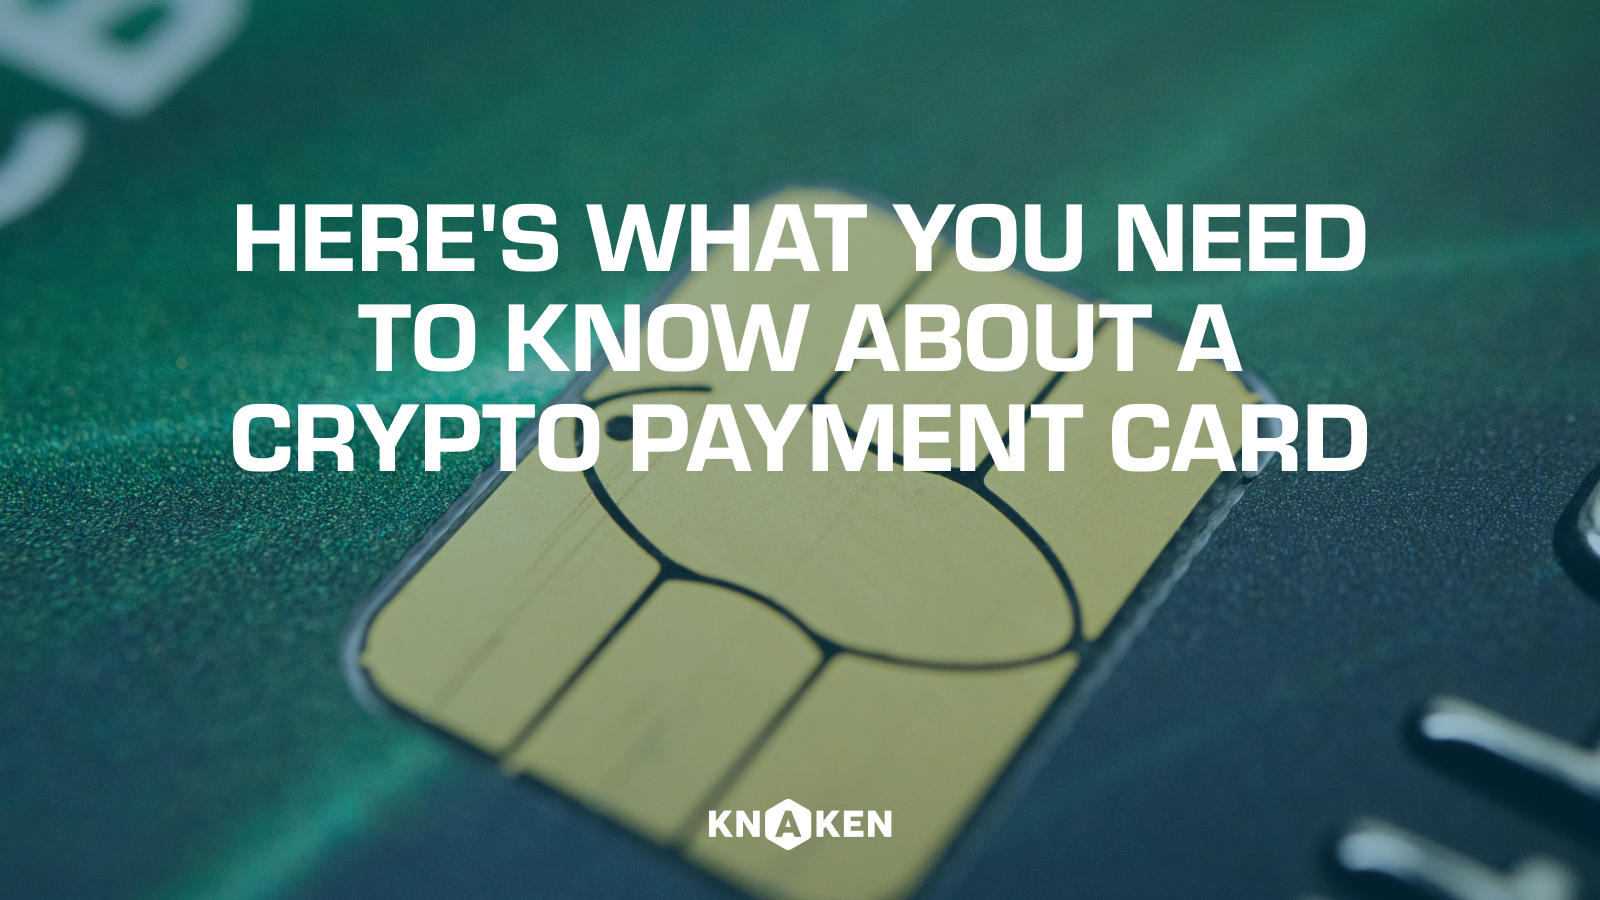 Here's What You Need to Know About a Crypto Payment Card